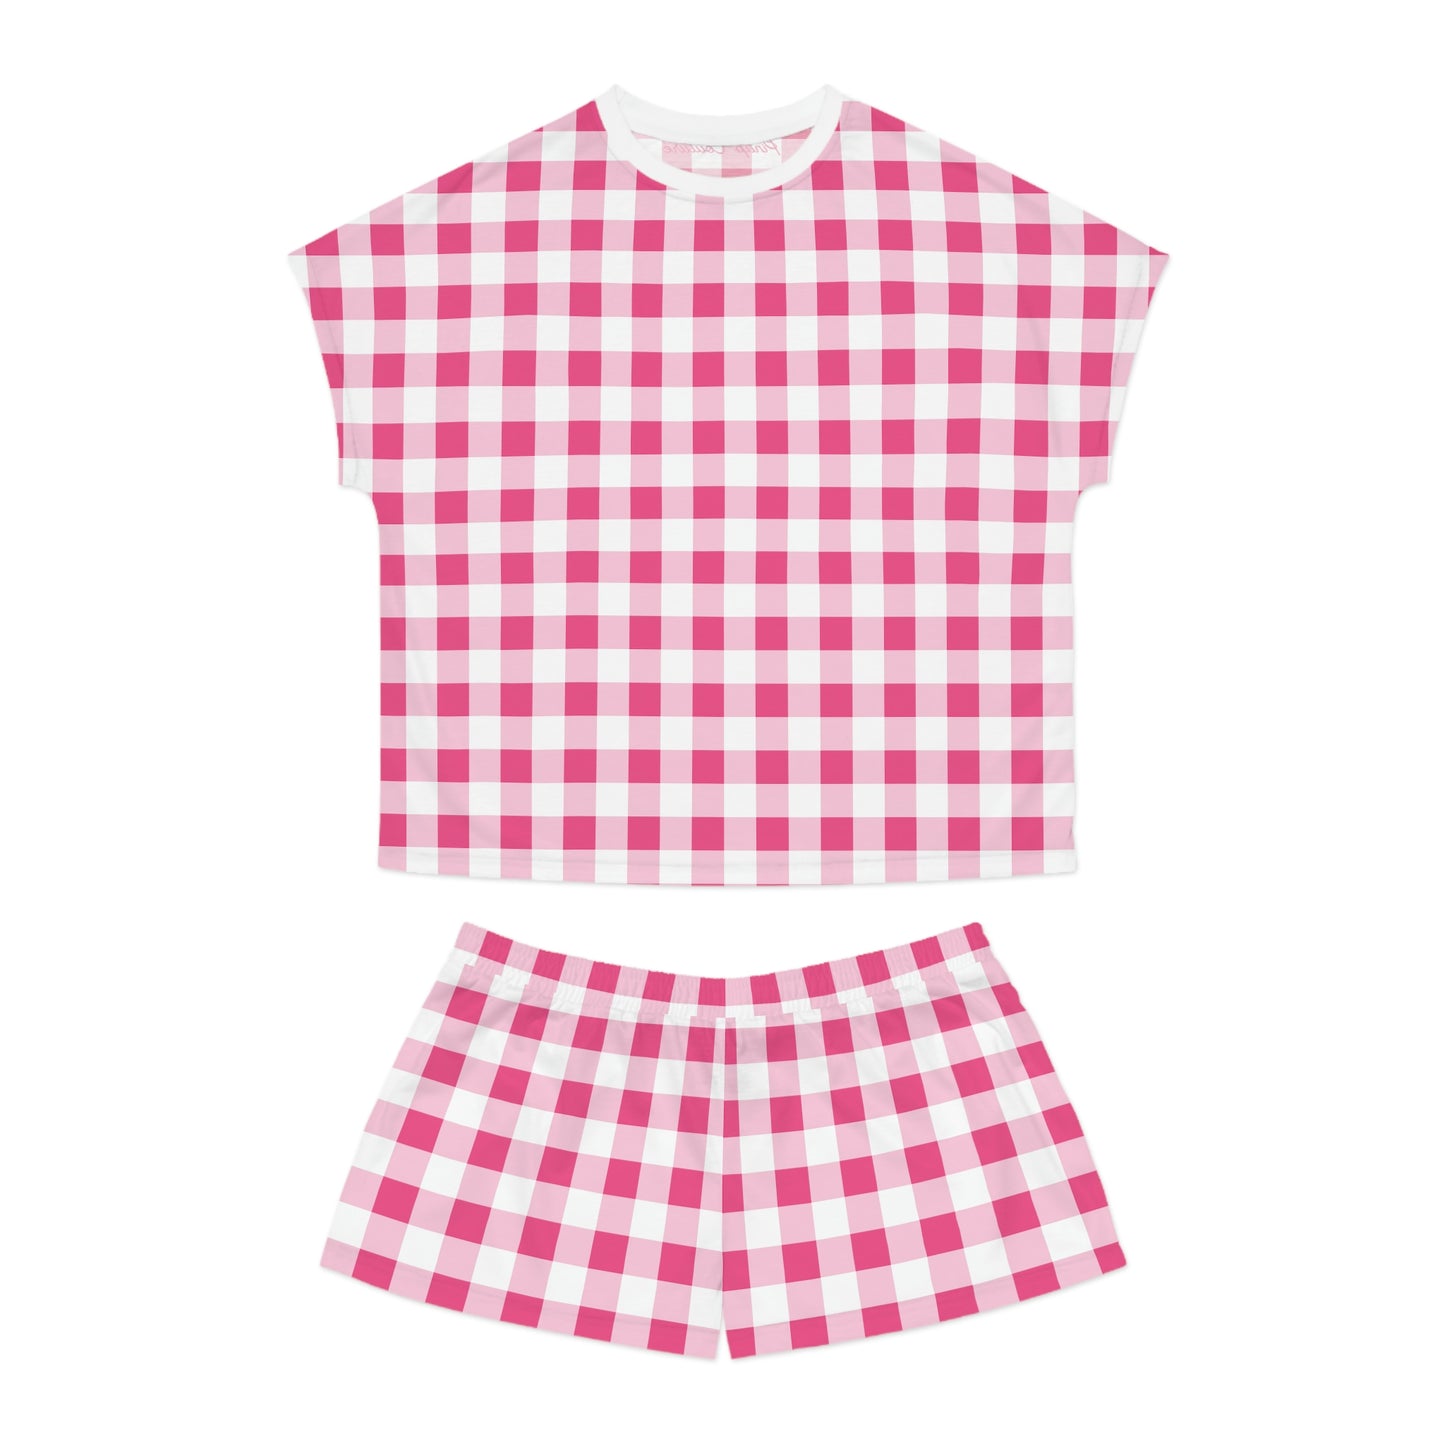 TGIF Sleepover PJs in Everything Nice Pink Gingham Tee & Pajama Shorts-Set | Pinup Couture Relaxed